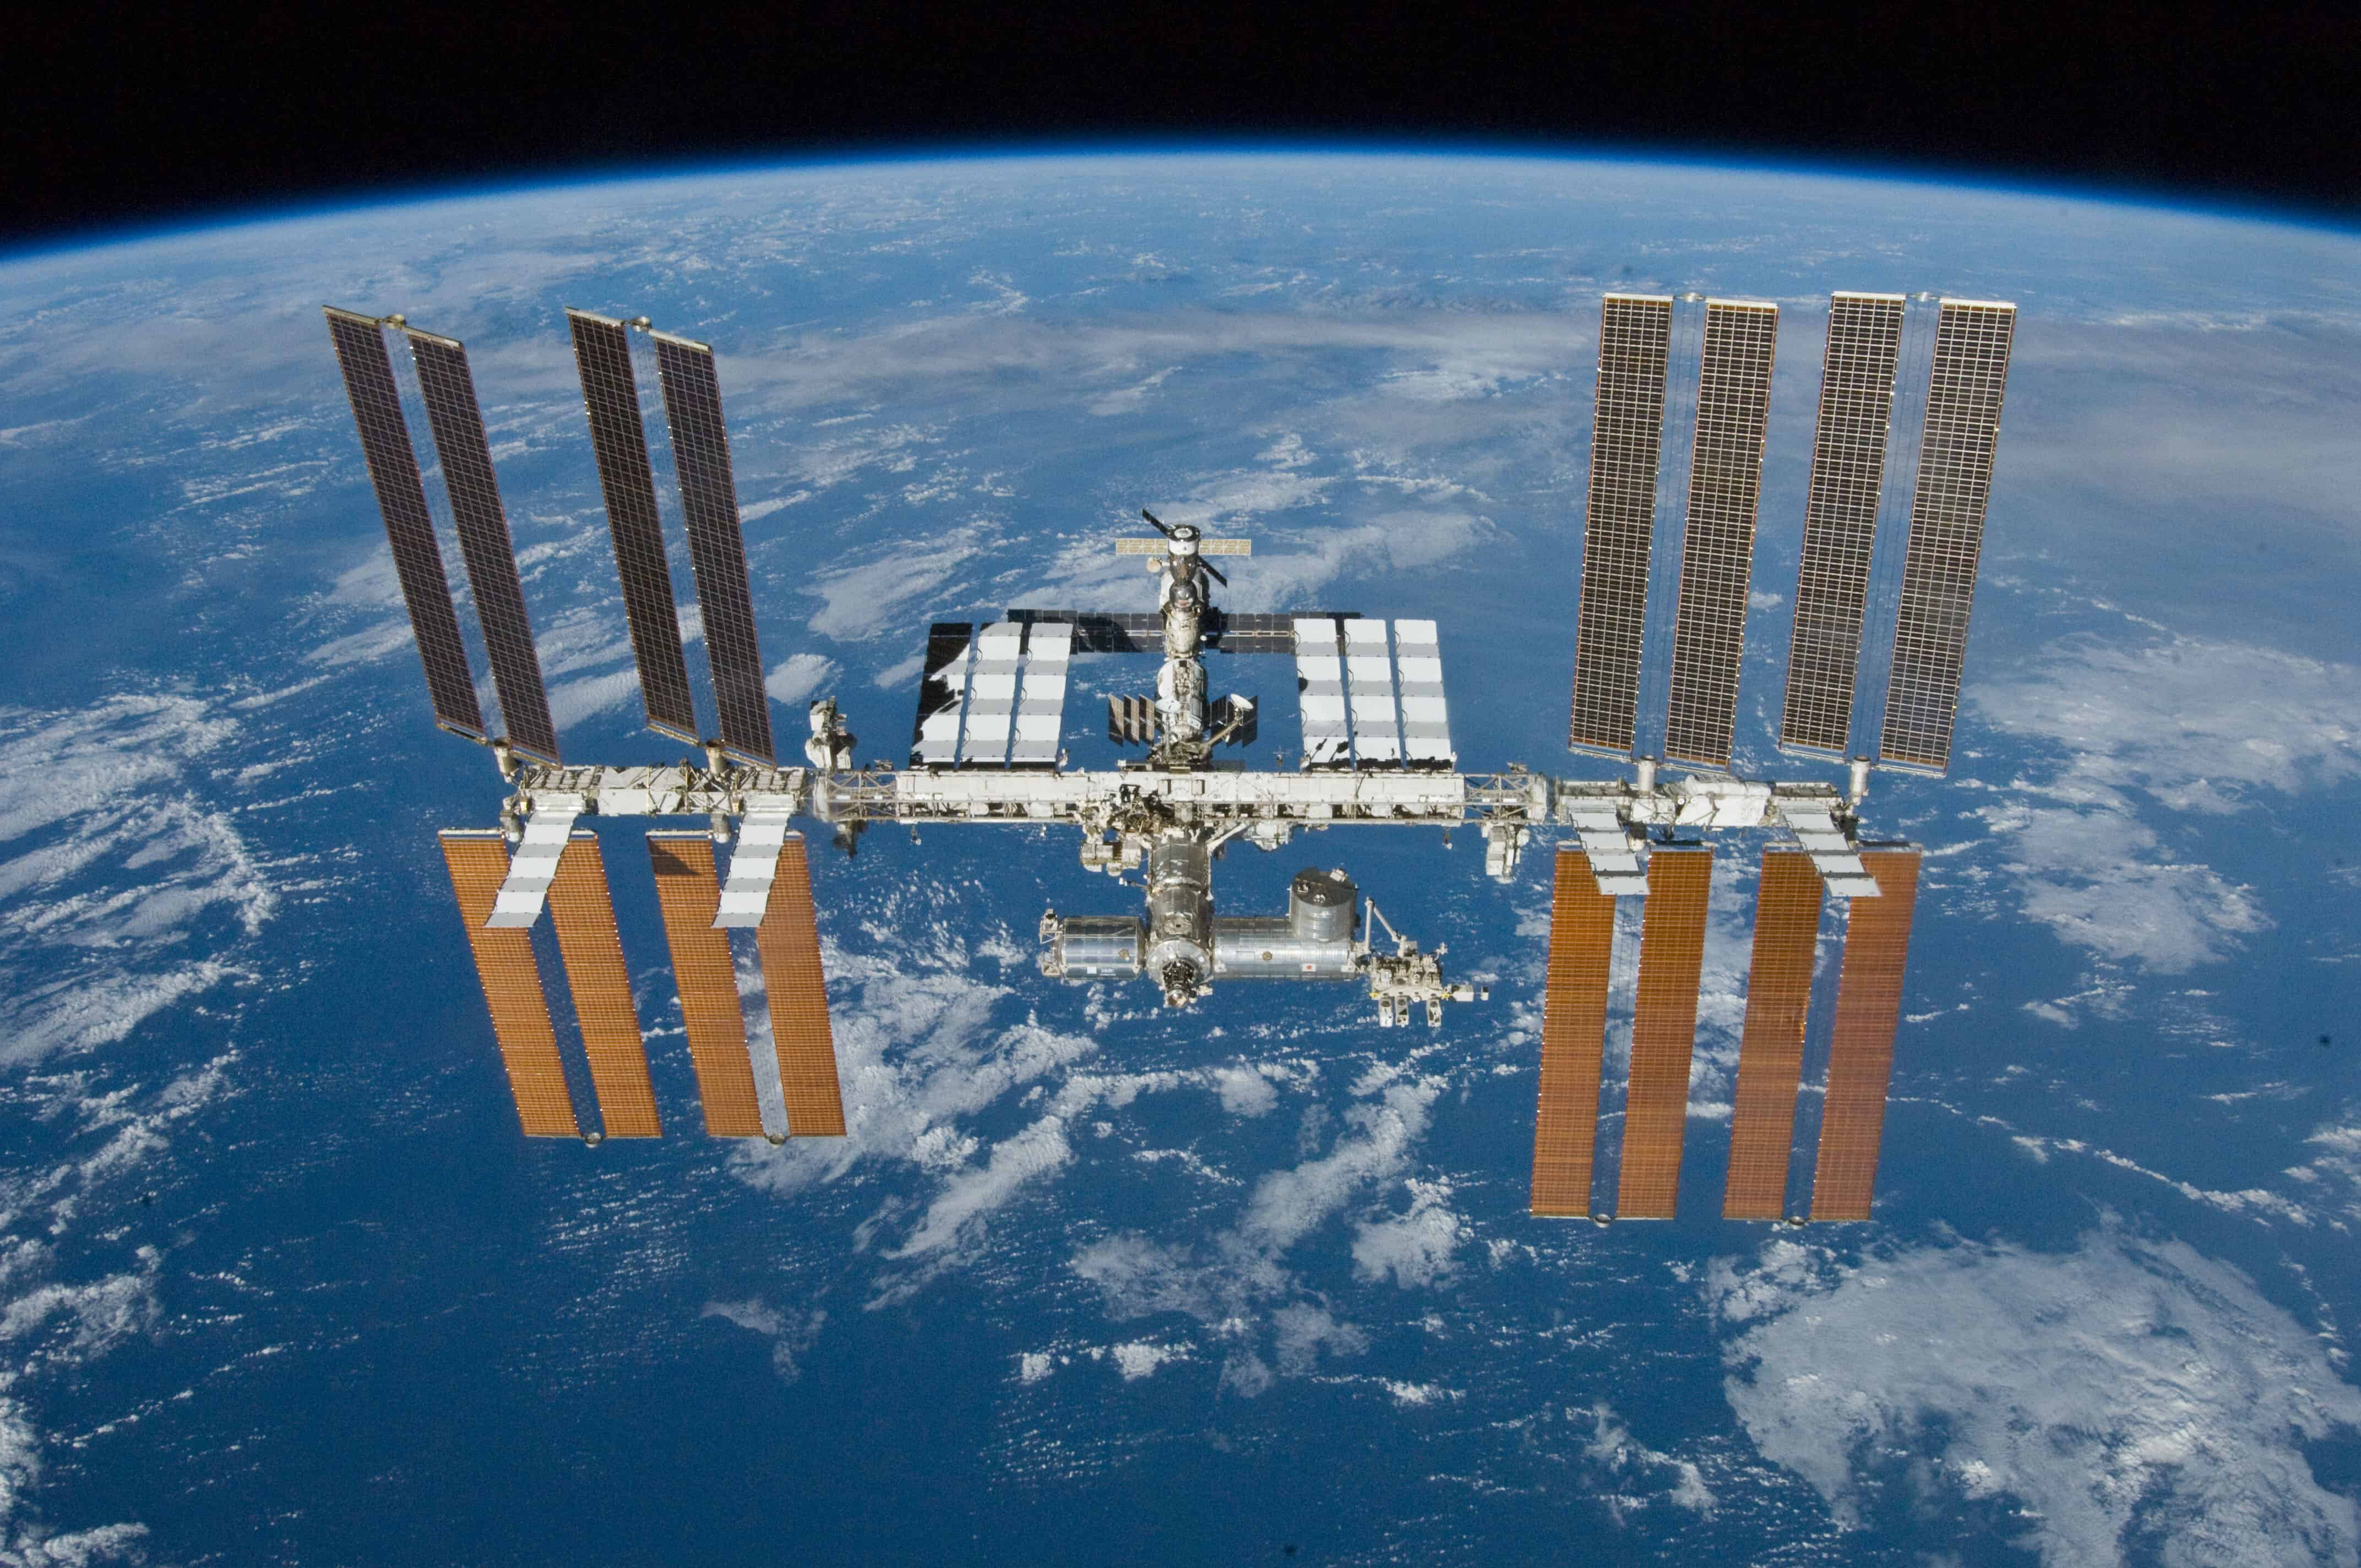 The technology was developed to monitor the crew of the ISS